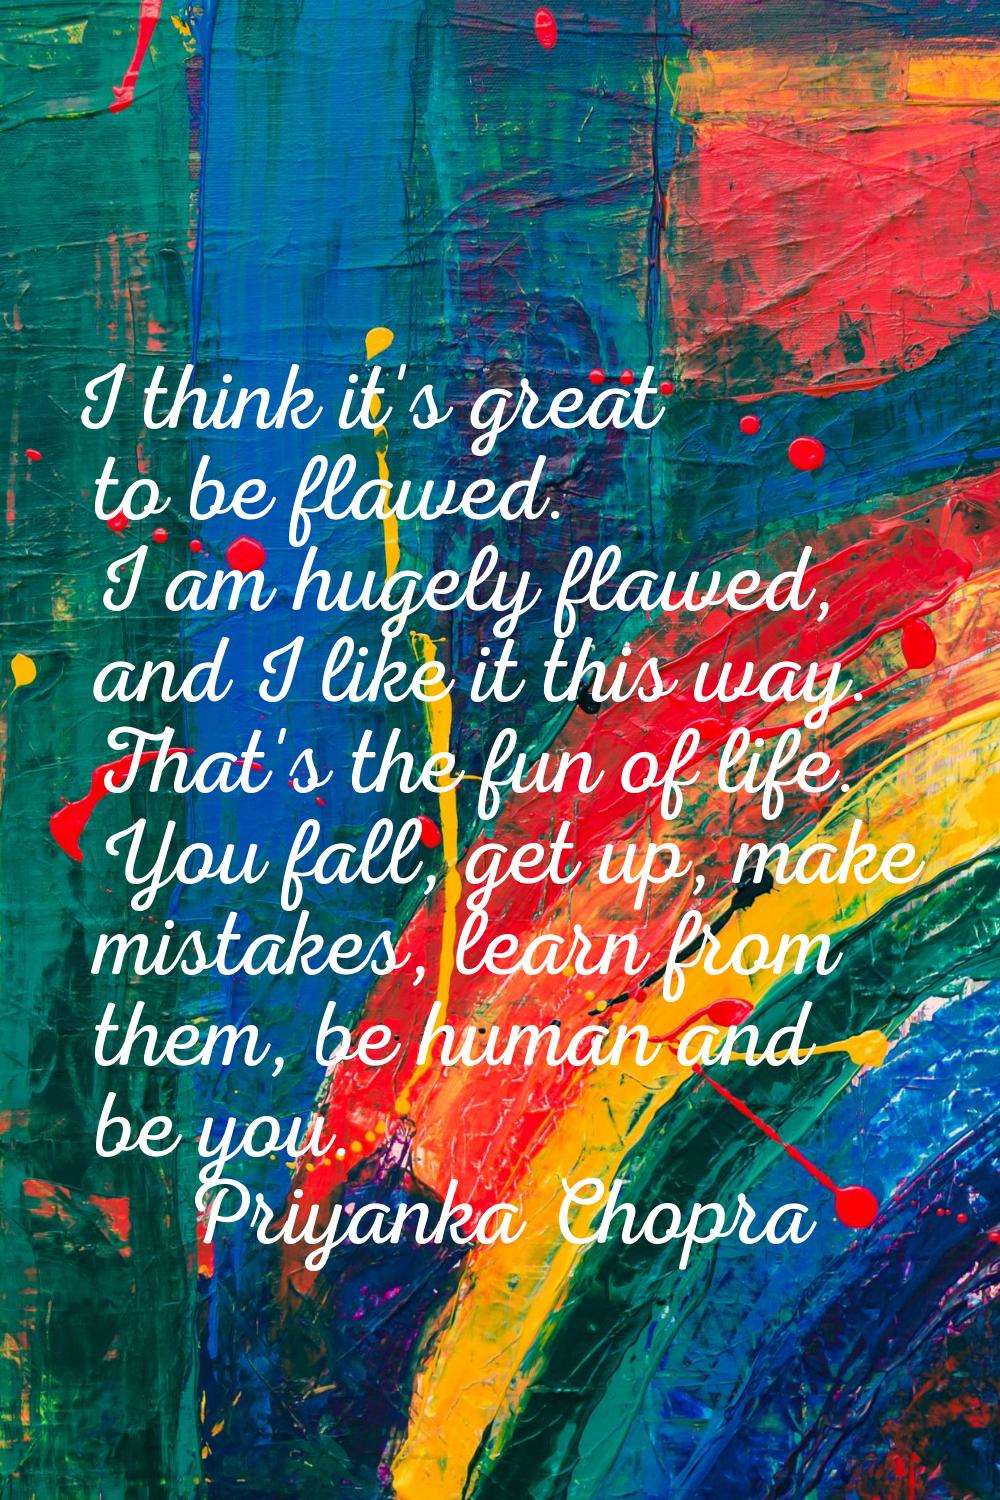 I think it's great to be flawed. I am hugely flawed, and I like it this way. That's the fun of life